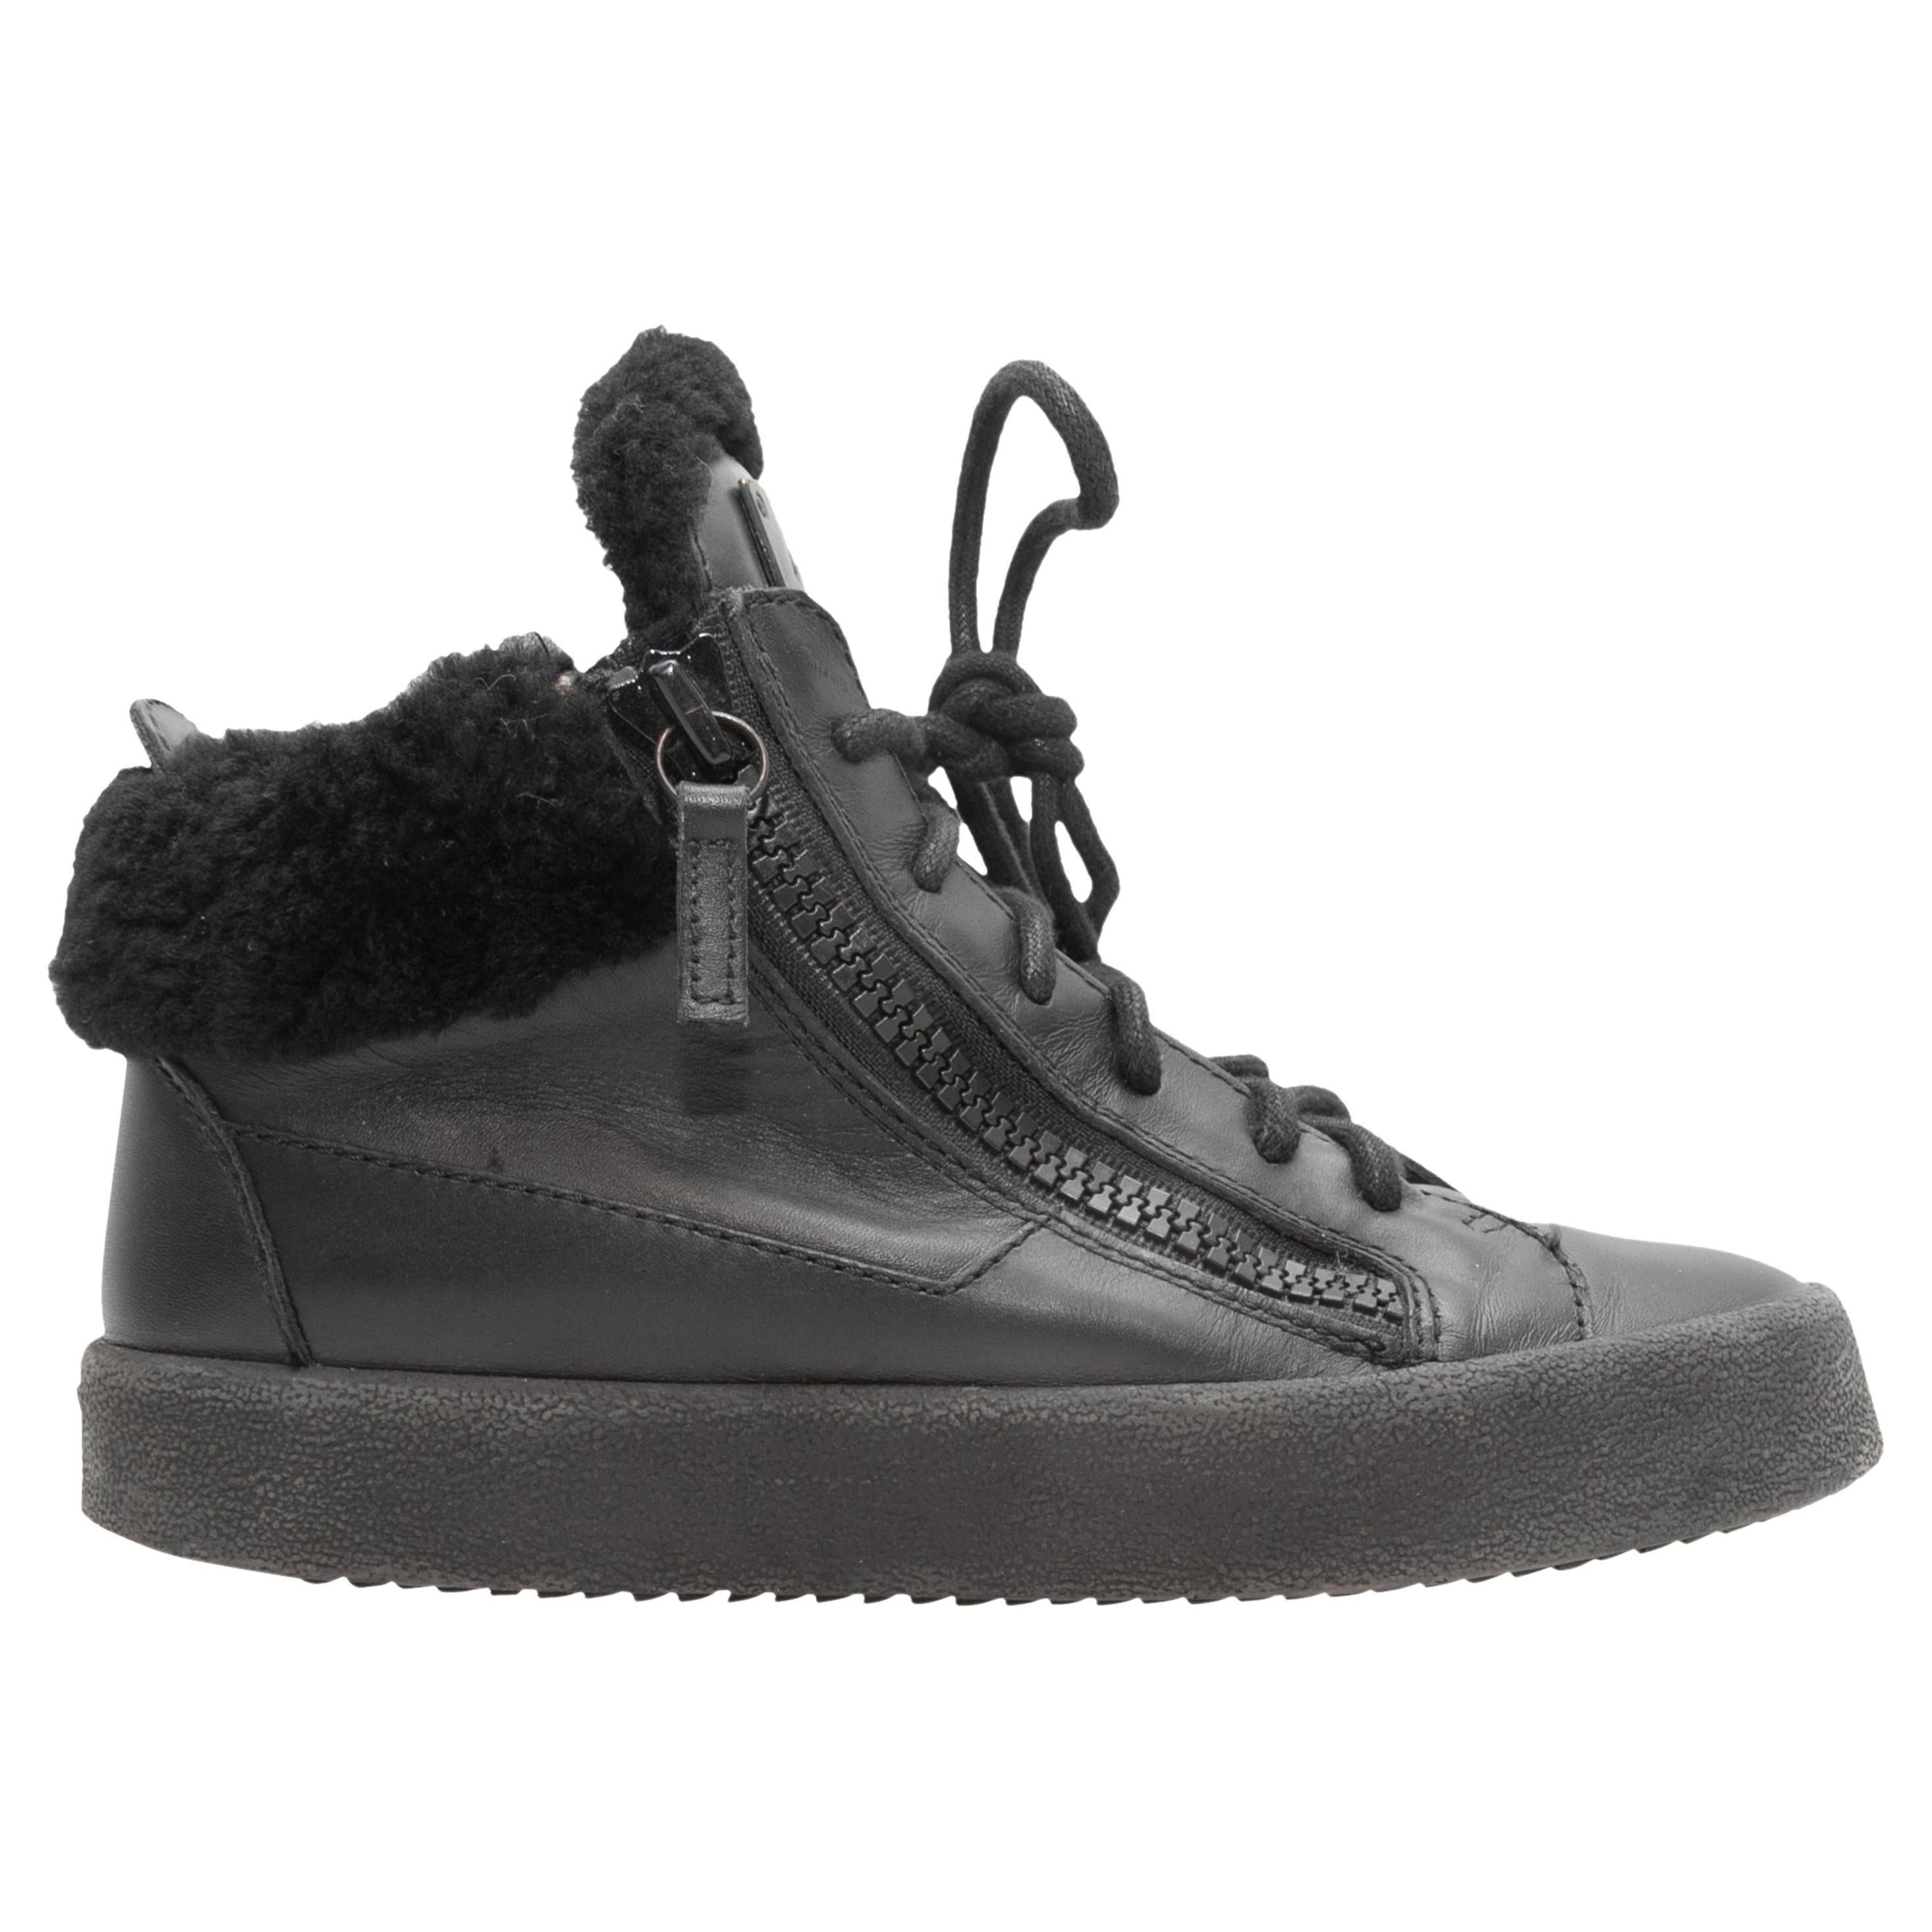 Black Giuseppe Zanotti High-Top Shearling-Trimmed Sneakers Size 36 For Sale